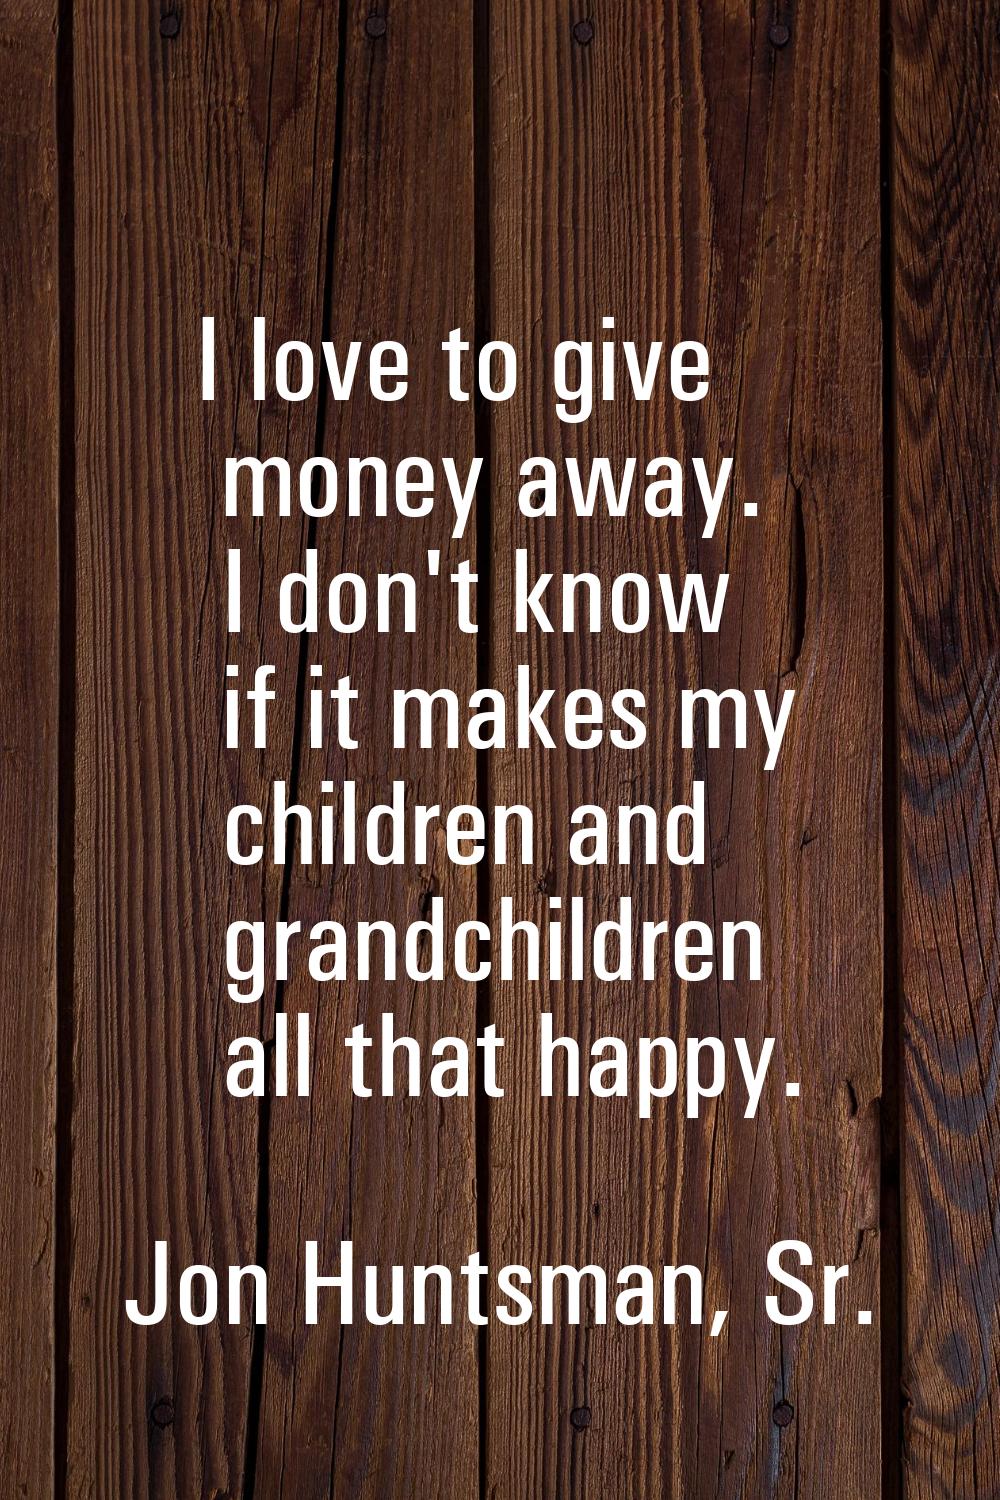 I love to give money away. I don't know if it makes my children and grandchildren all that happy.